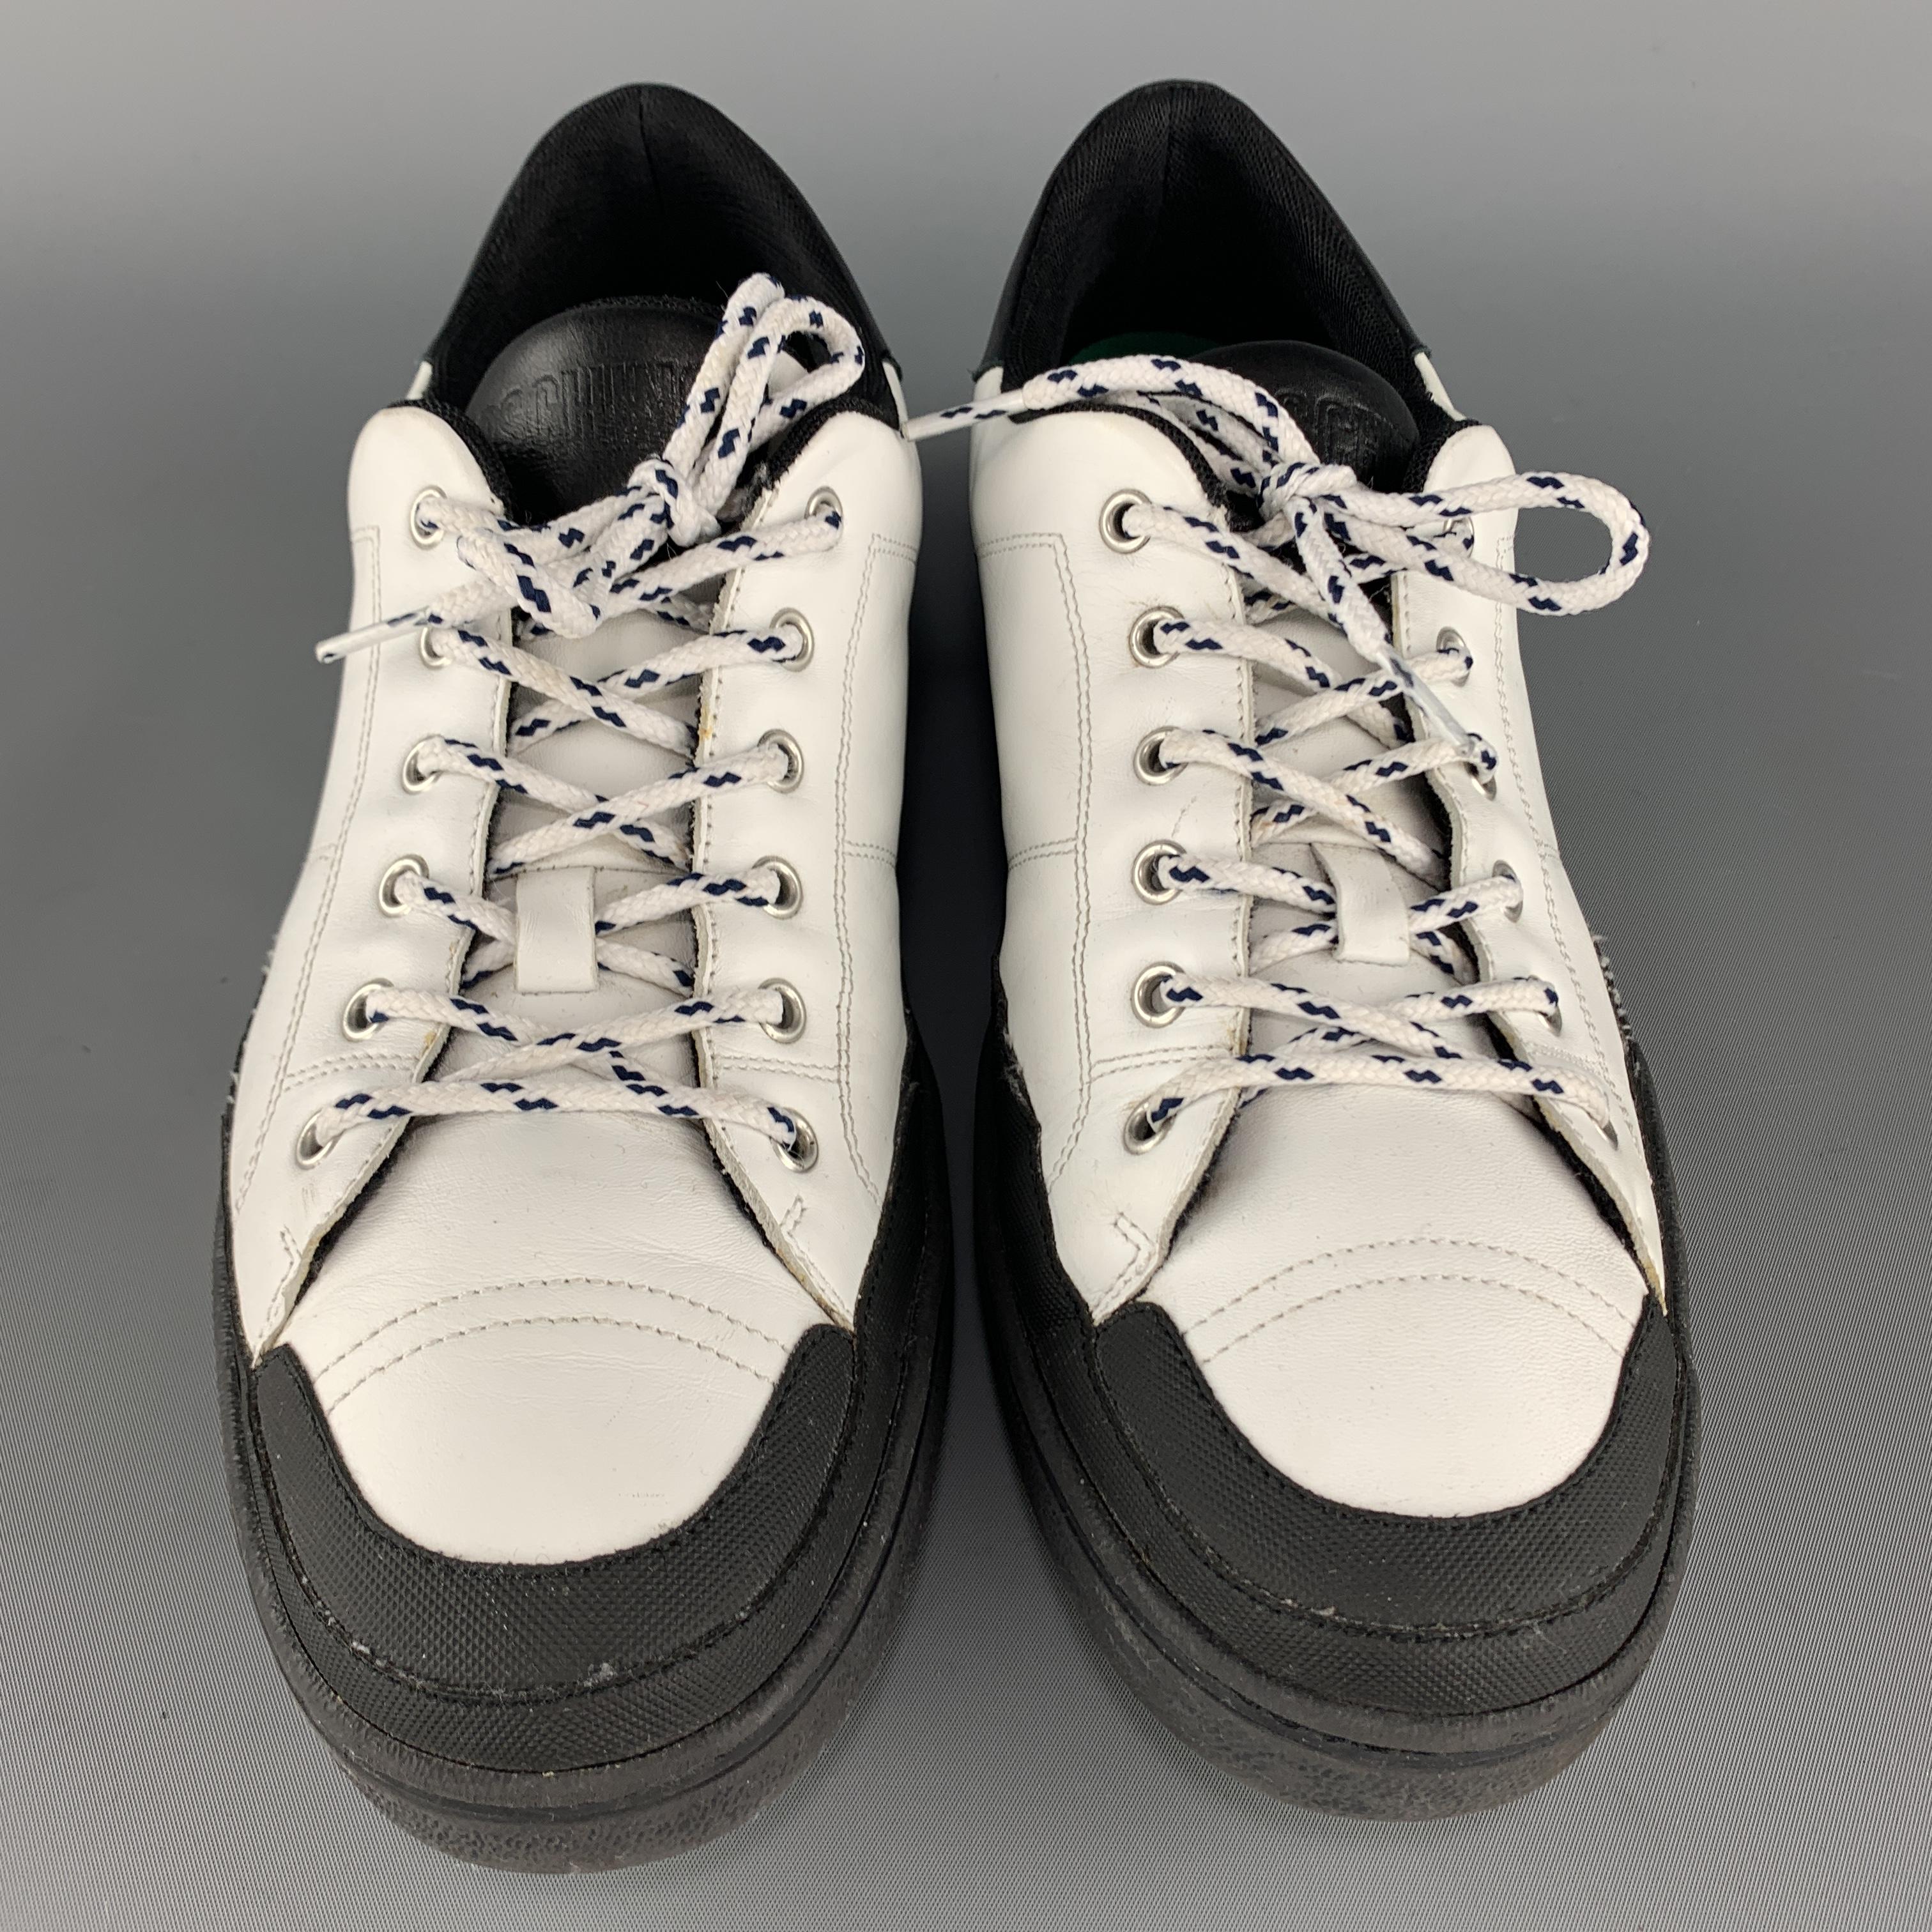 MOSCHINO sneakers come in white leather with a black heel and extended rubber sole with logo. 

Excellent Pre-Owned Condition.
Marked: IT 45

Outsole: 12 x 4 in.